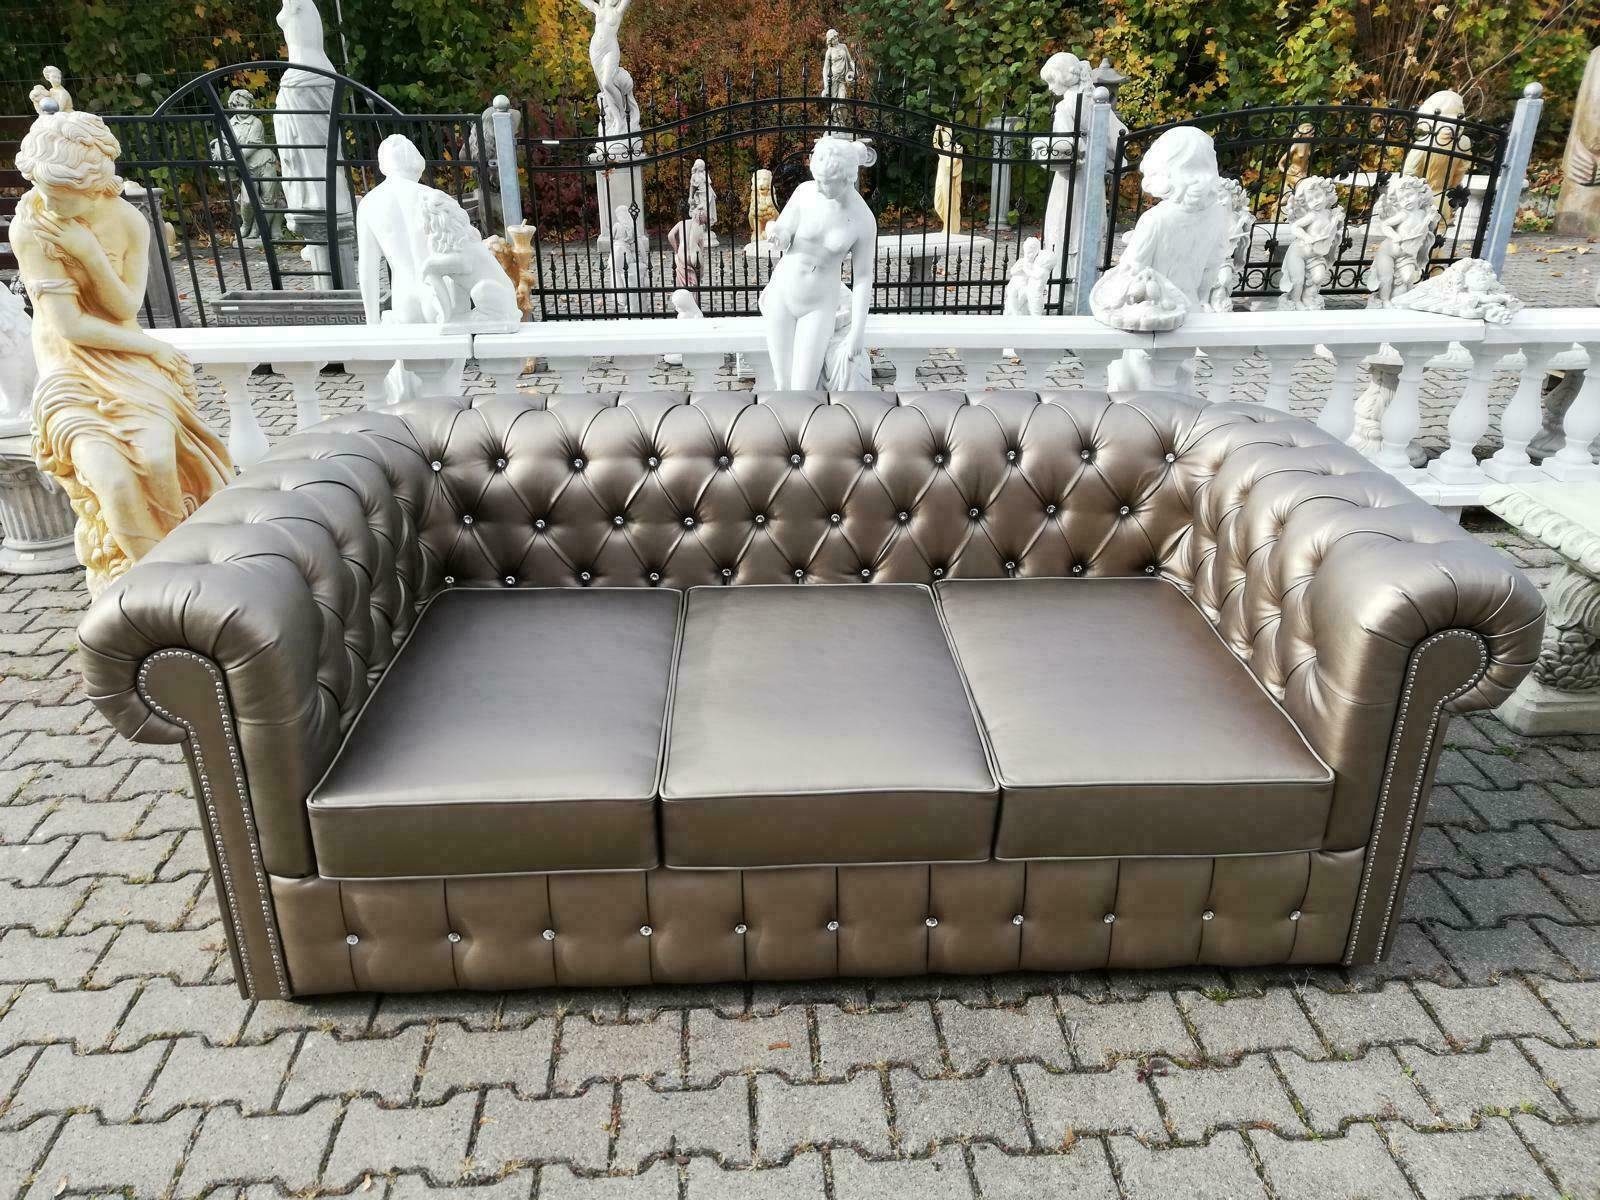 JVmoebel Chesterfield-Sofa, Design Chesterfield Sofa 3-Sitzer Gold Couch